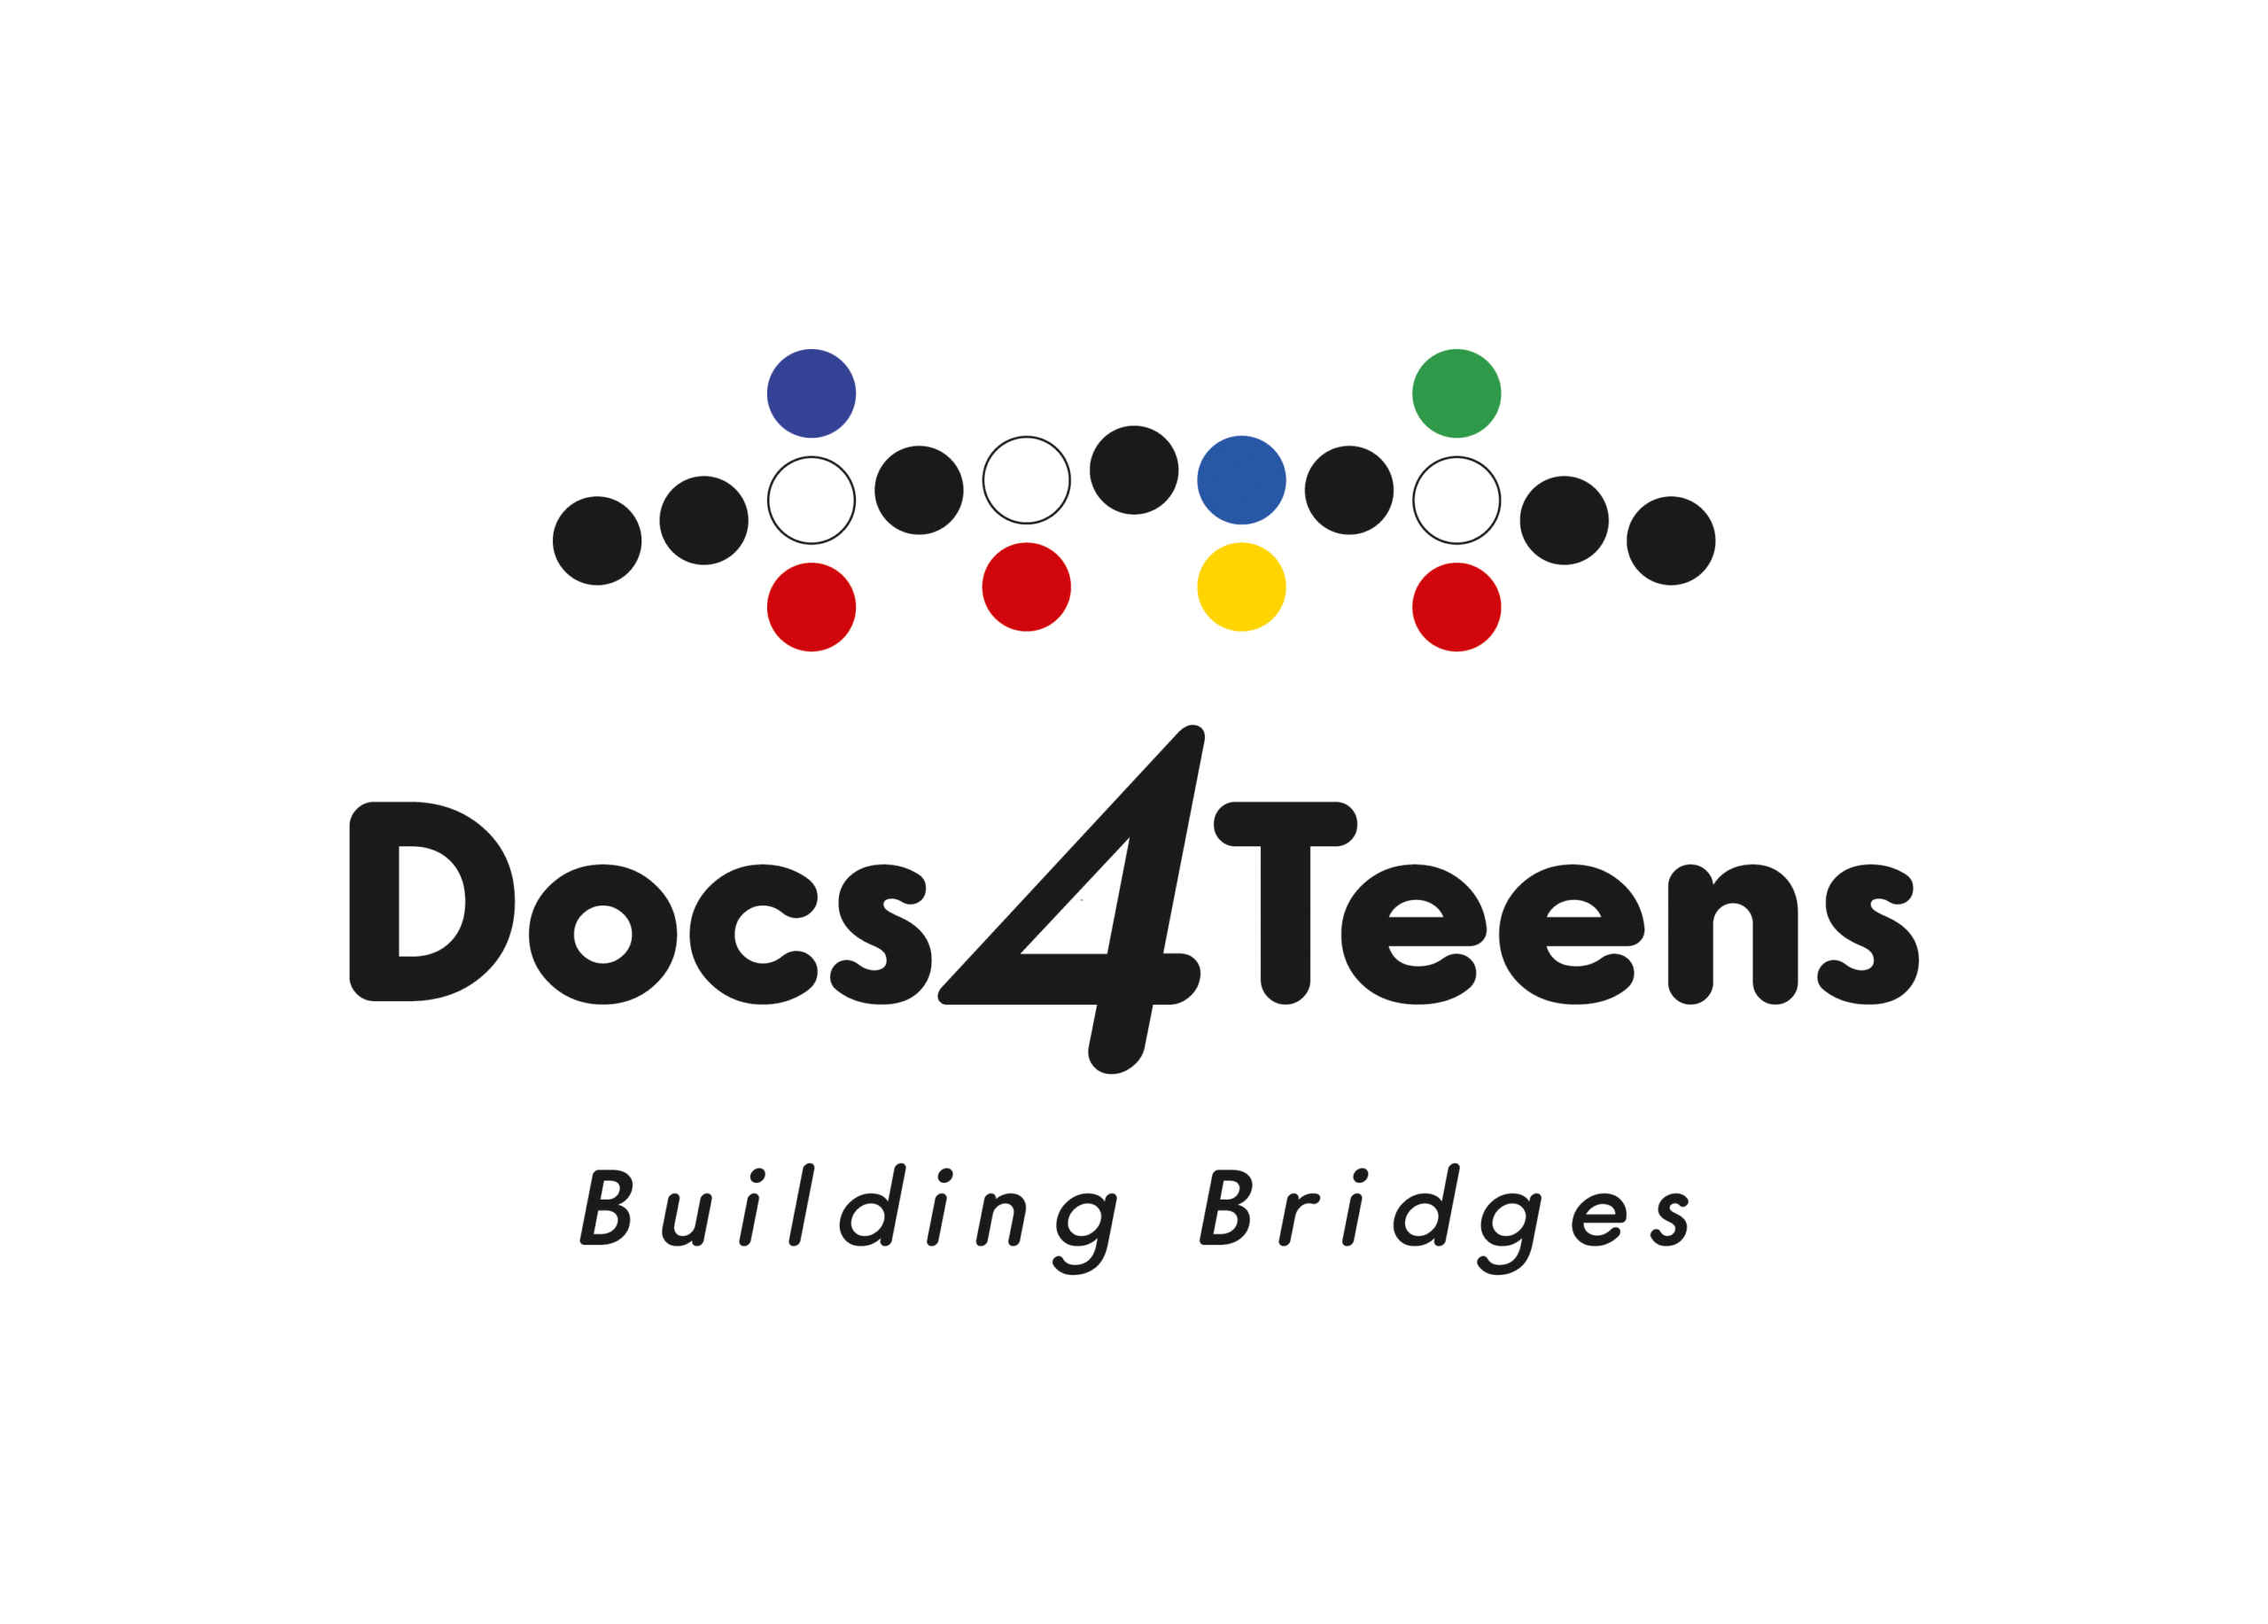 Second edition of the international Docs4Teens project begins